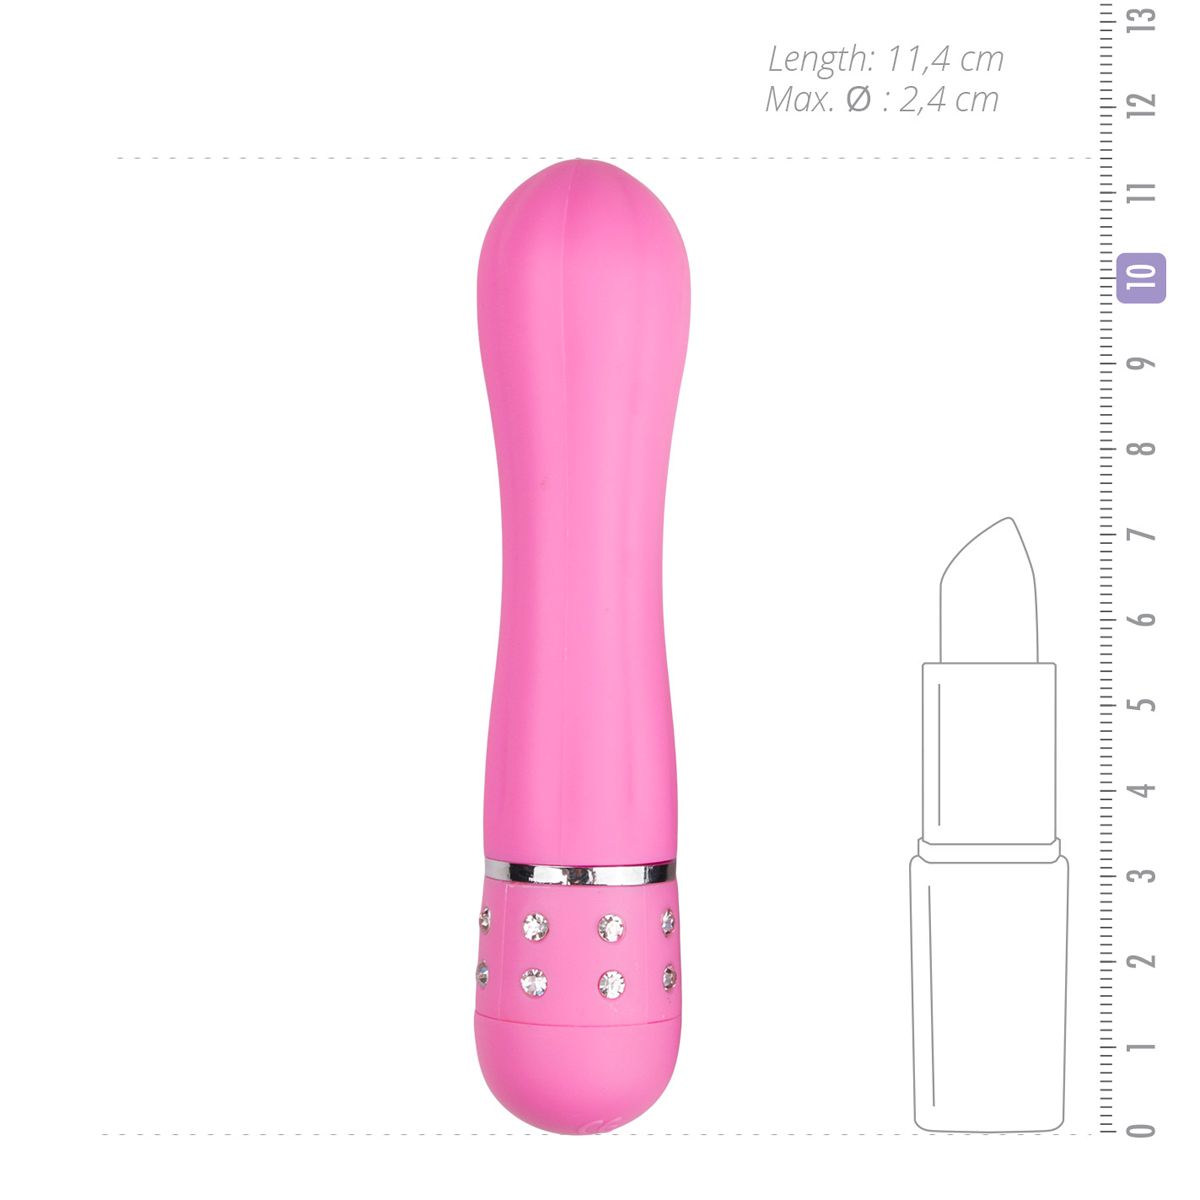 Easy Toys Mini-Vibrator mit Rillen in Pink  features